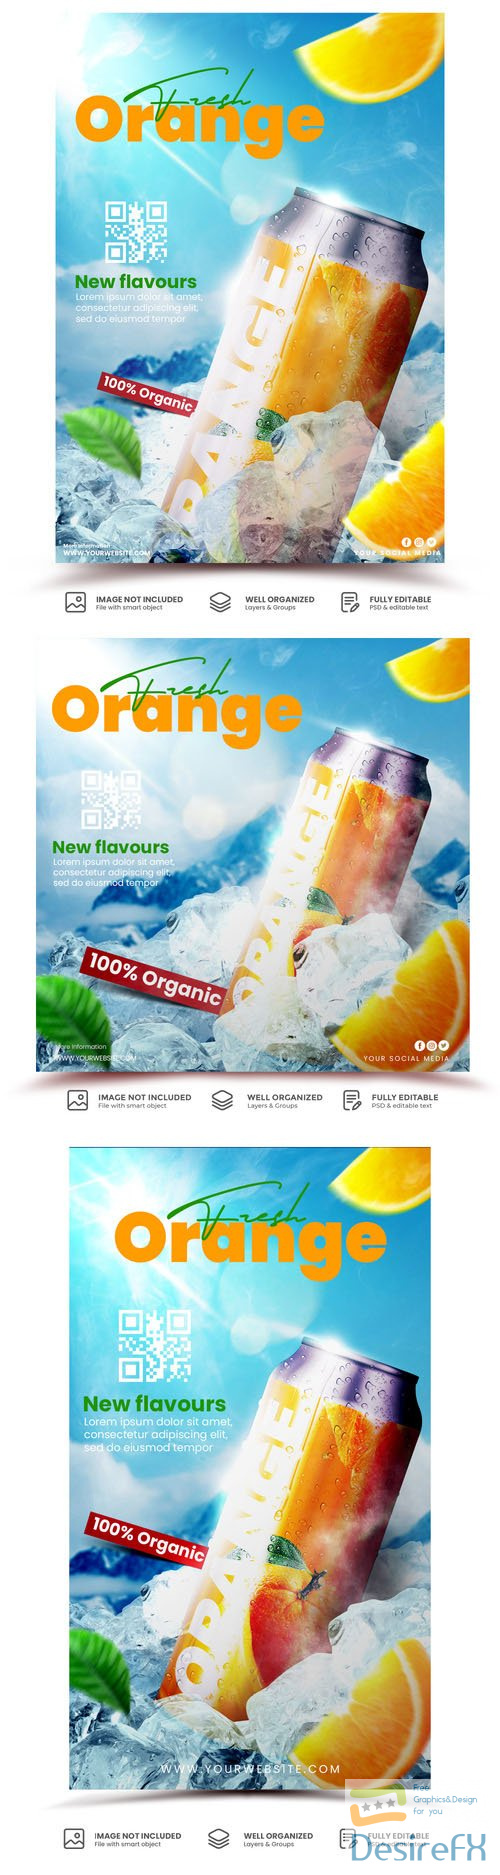 Fresh and natural organic orange juice promotion flyer template